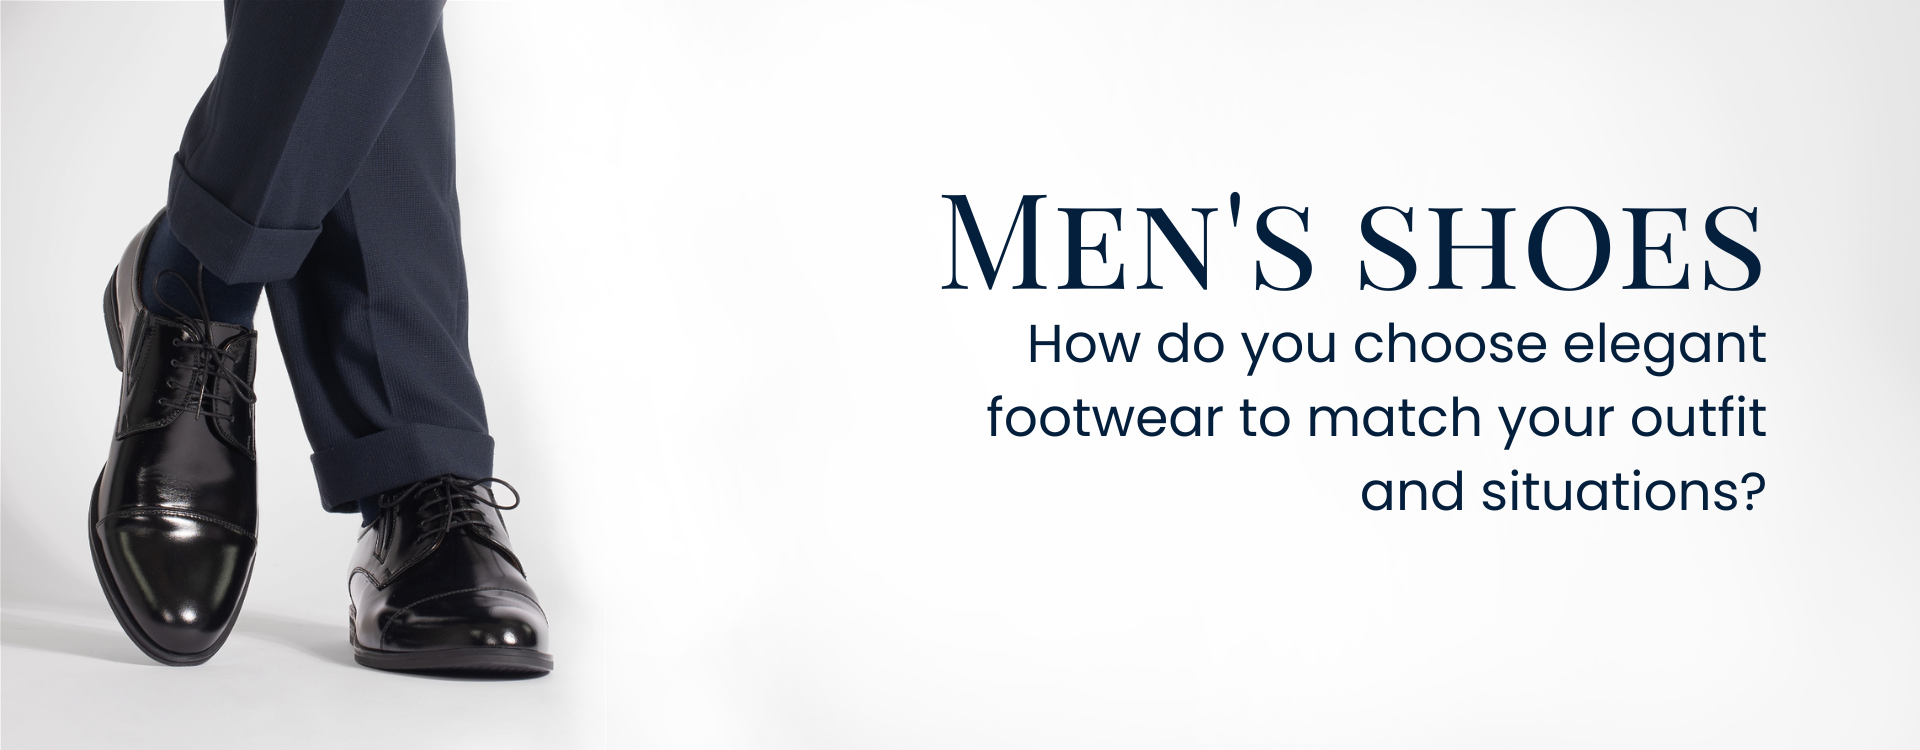 Men's shoes. How do you choose elegant footwear to match your outfit and situations?